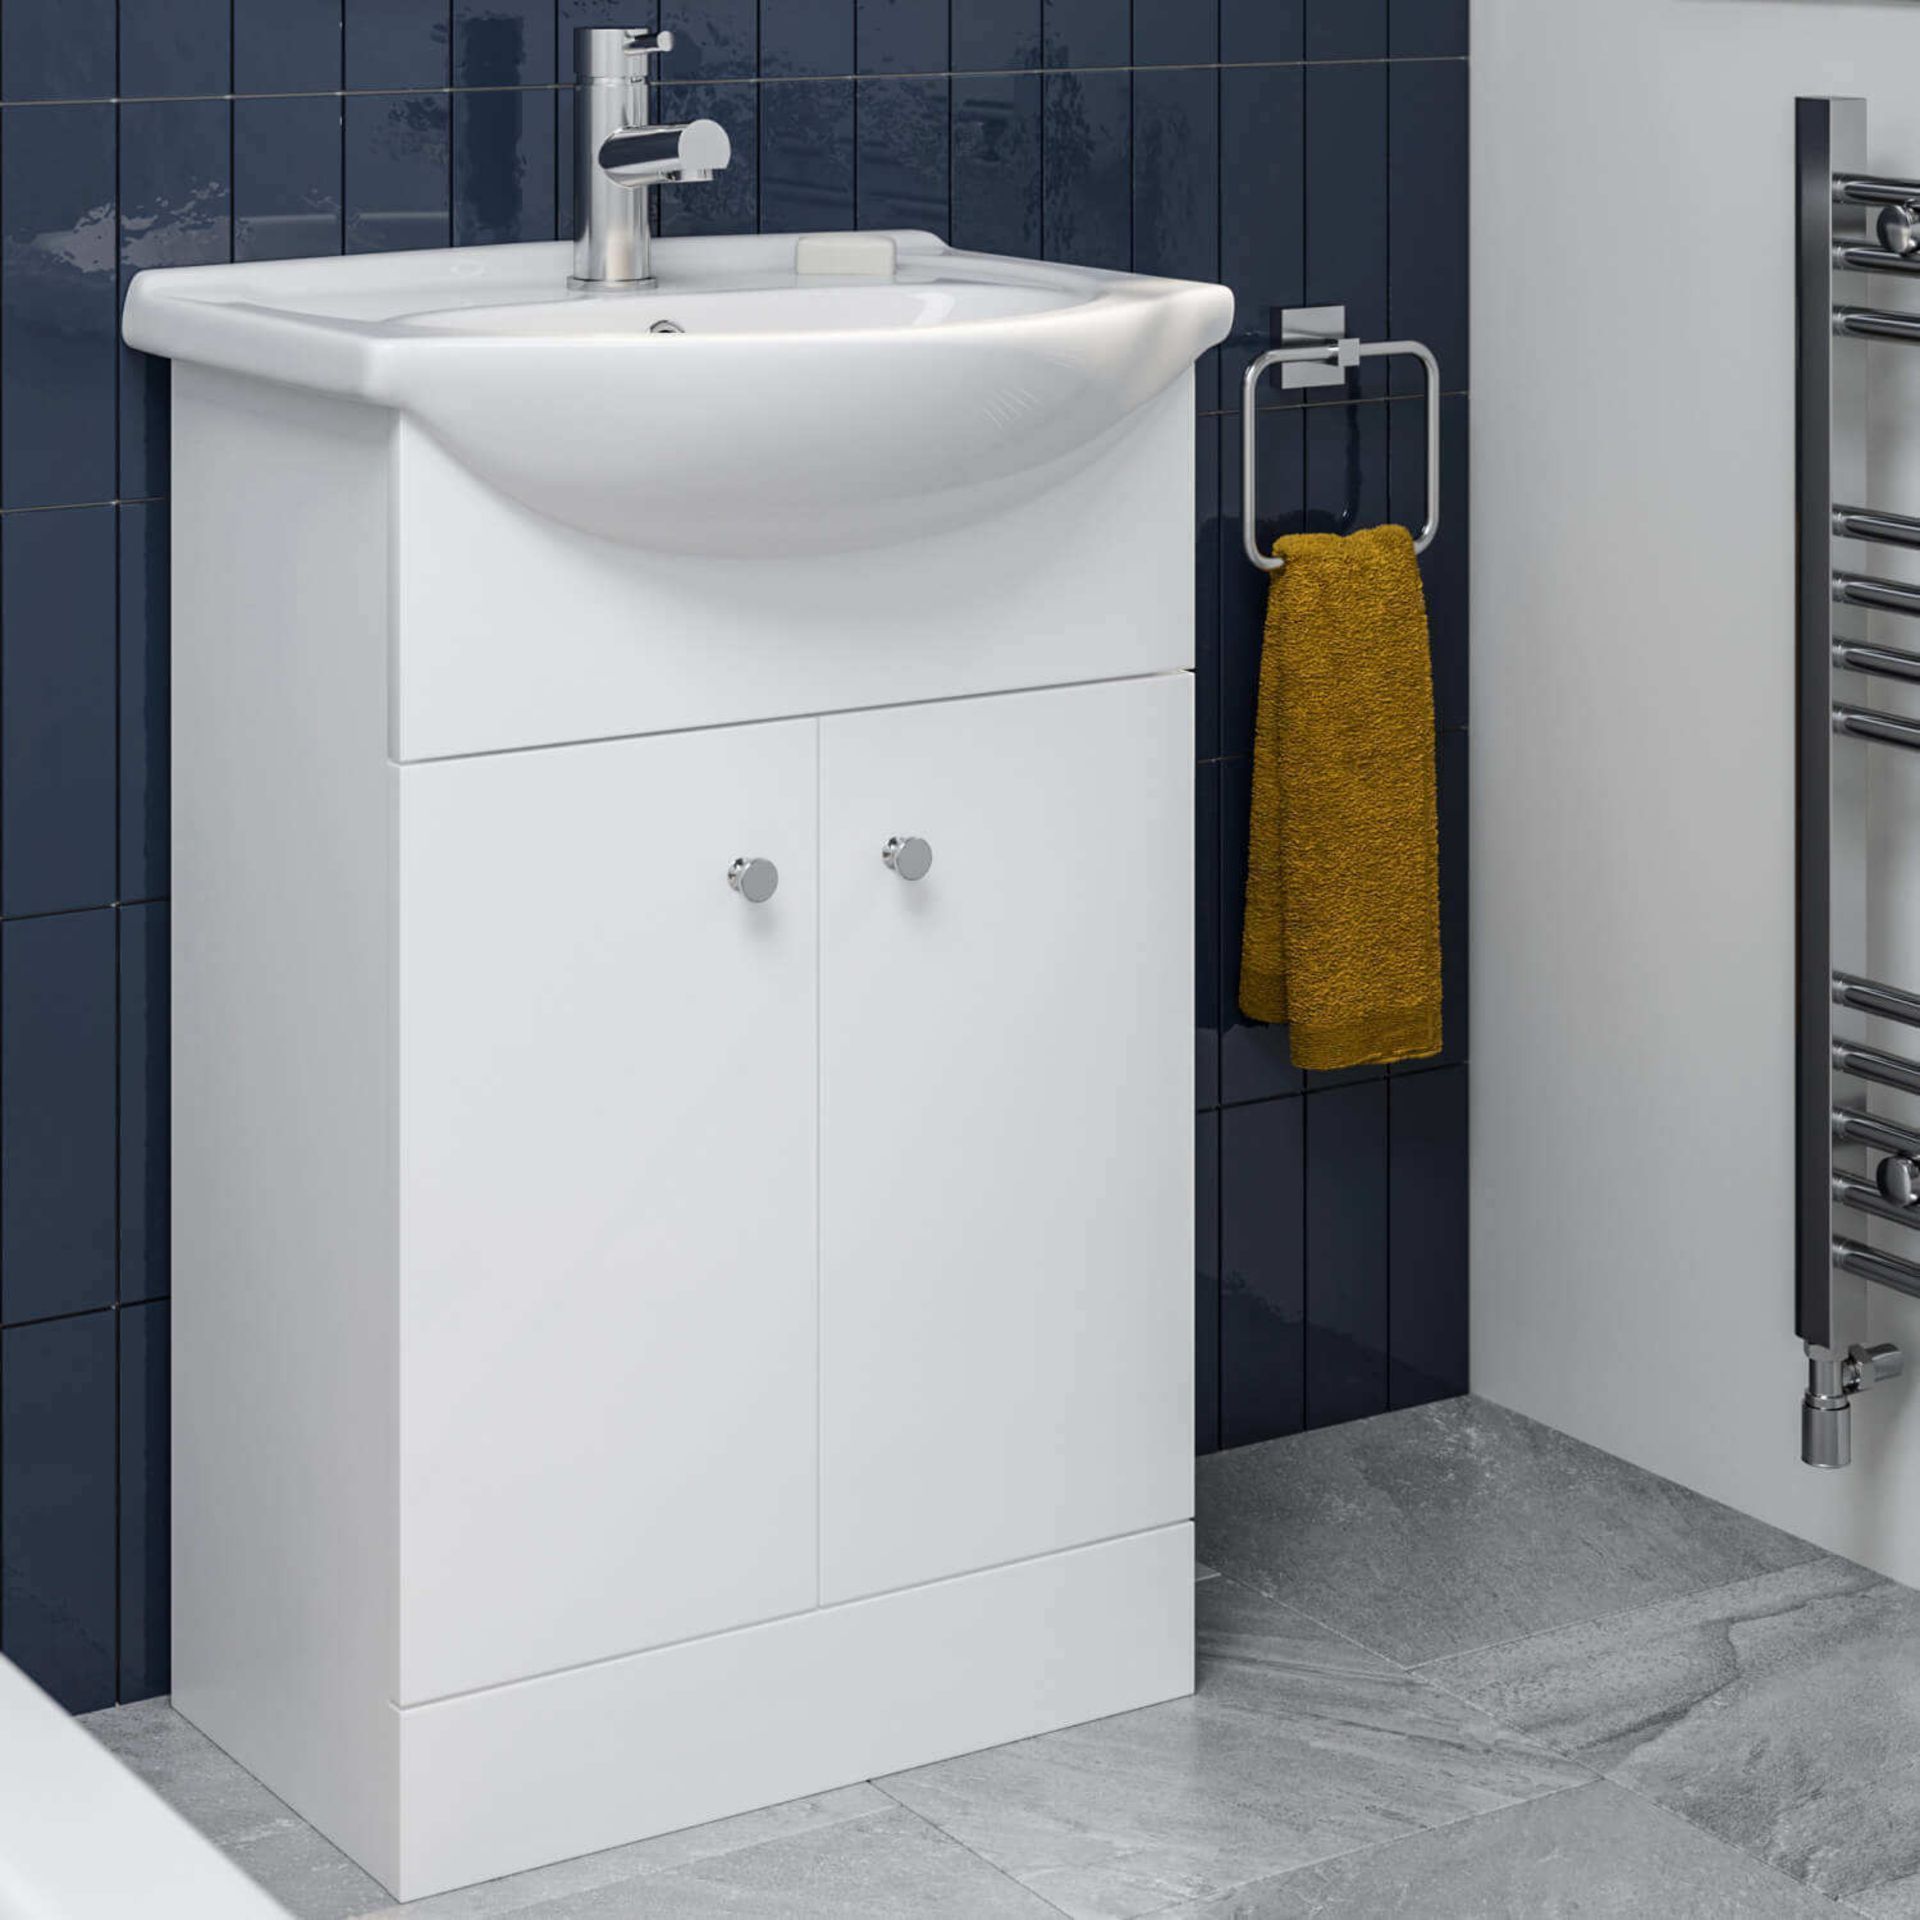 NEW & BOXED 650mm Quartz Basin Sink Vanity Unit Floor Standing White.RRP £399.99.Comes complet... - Image 2 of 3